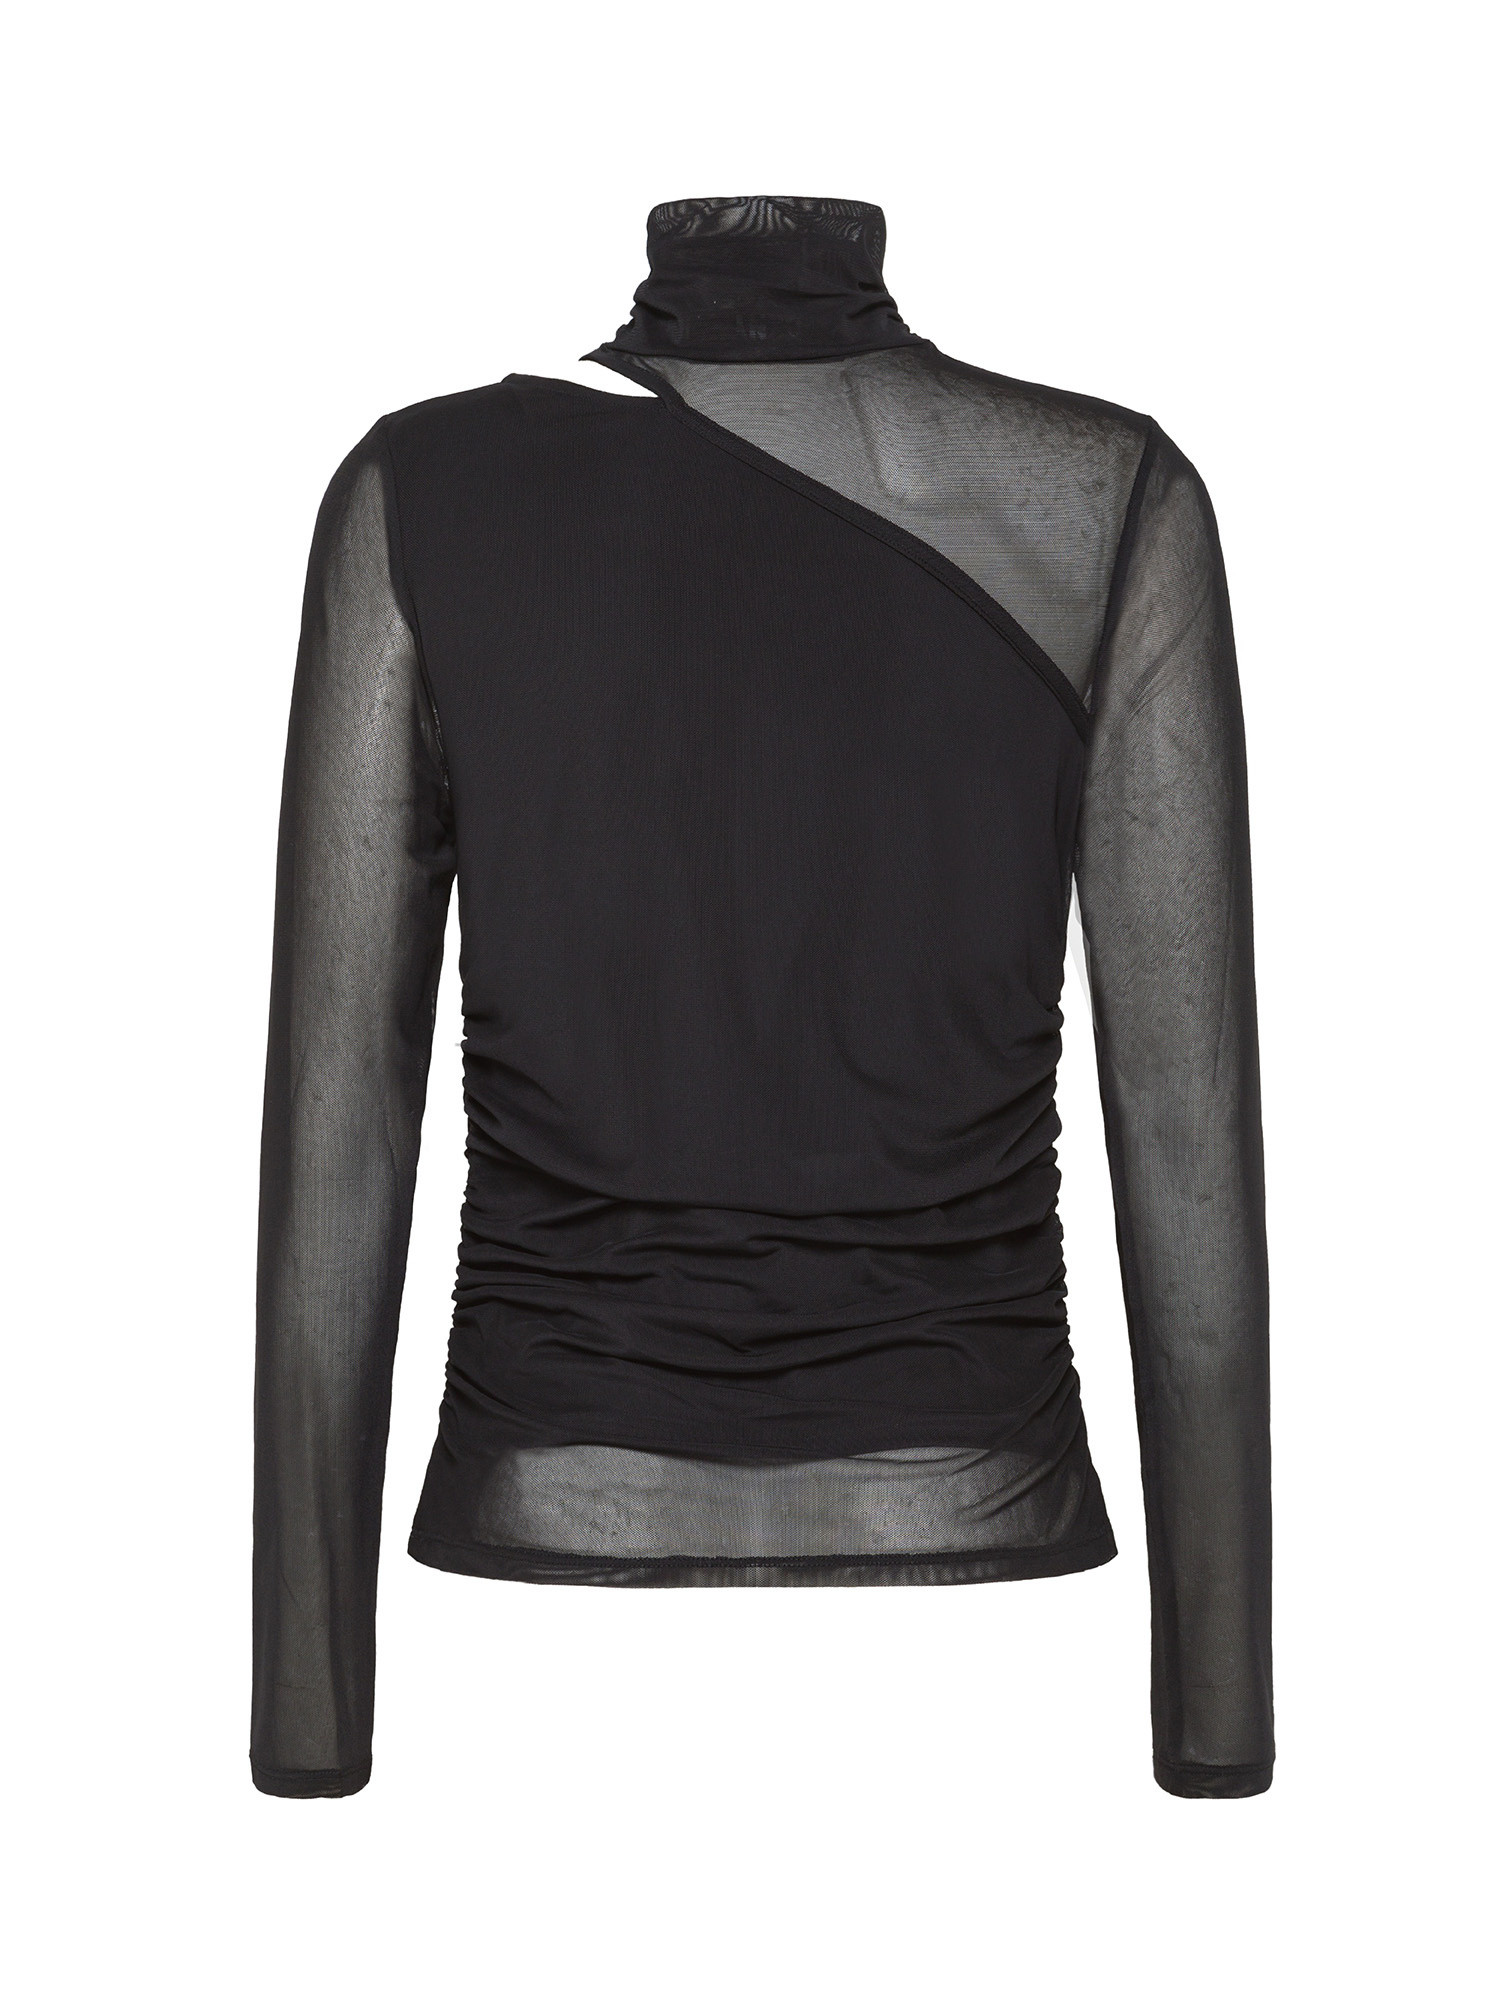 DKNY - Maglia in mesh con dettaglio cut out, Nero, large image number 1